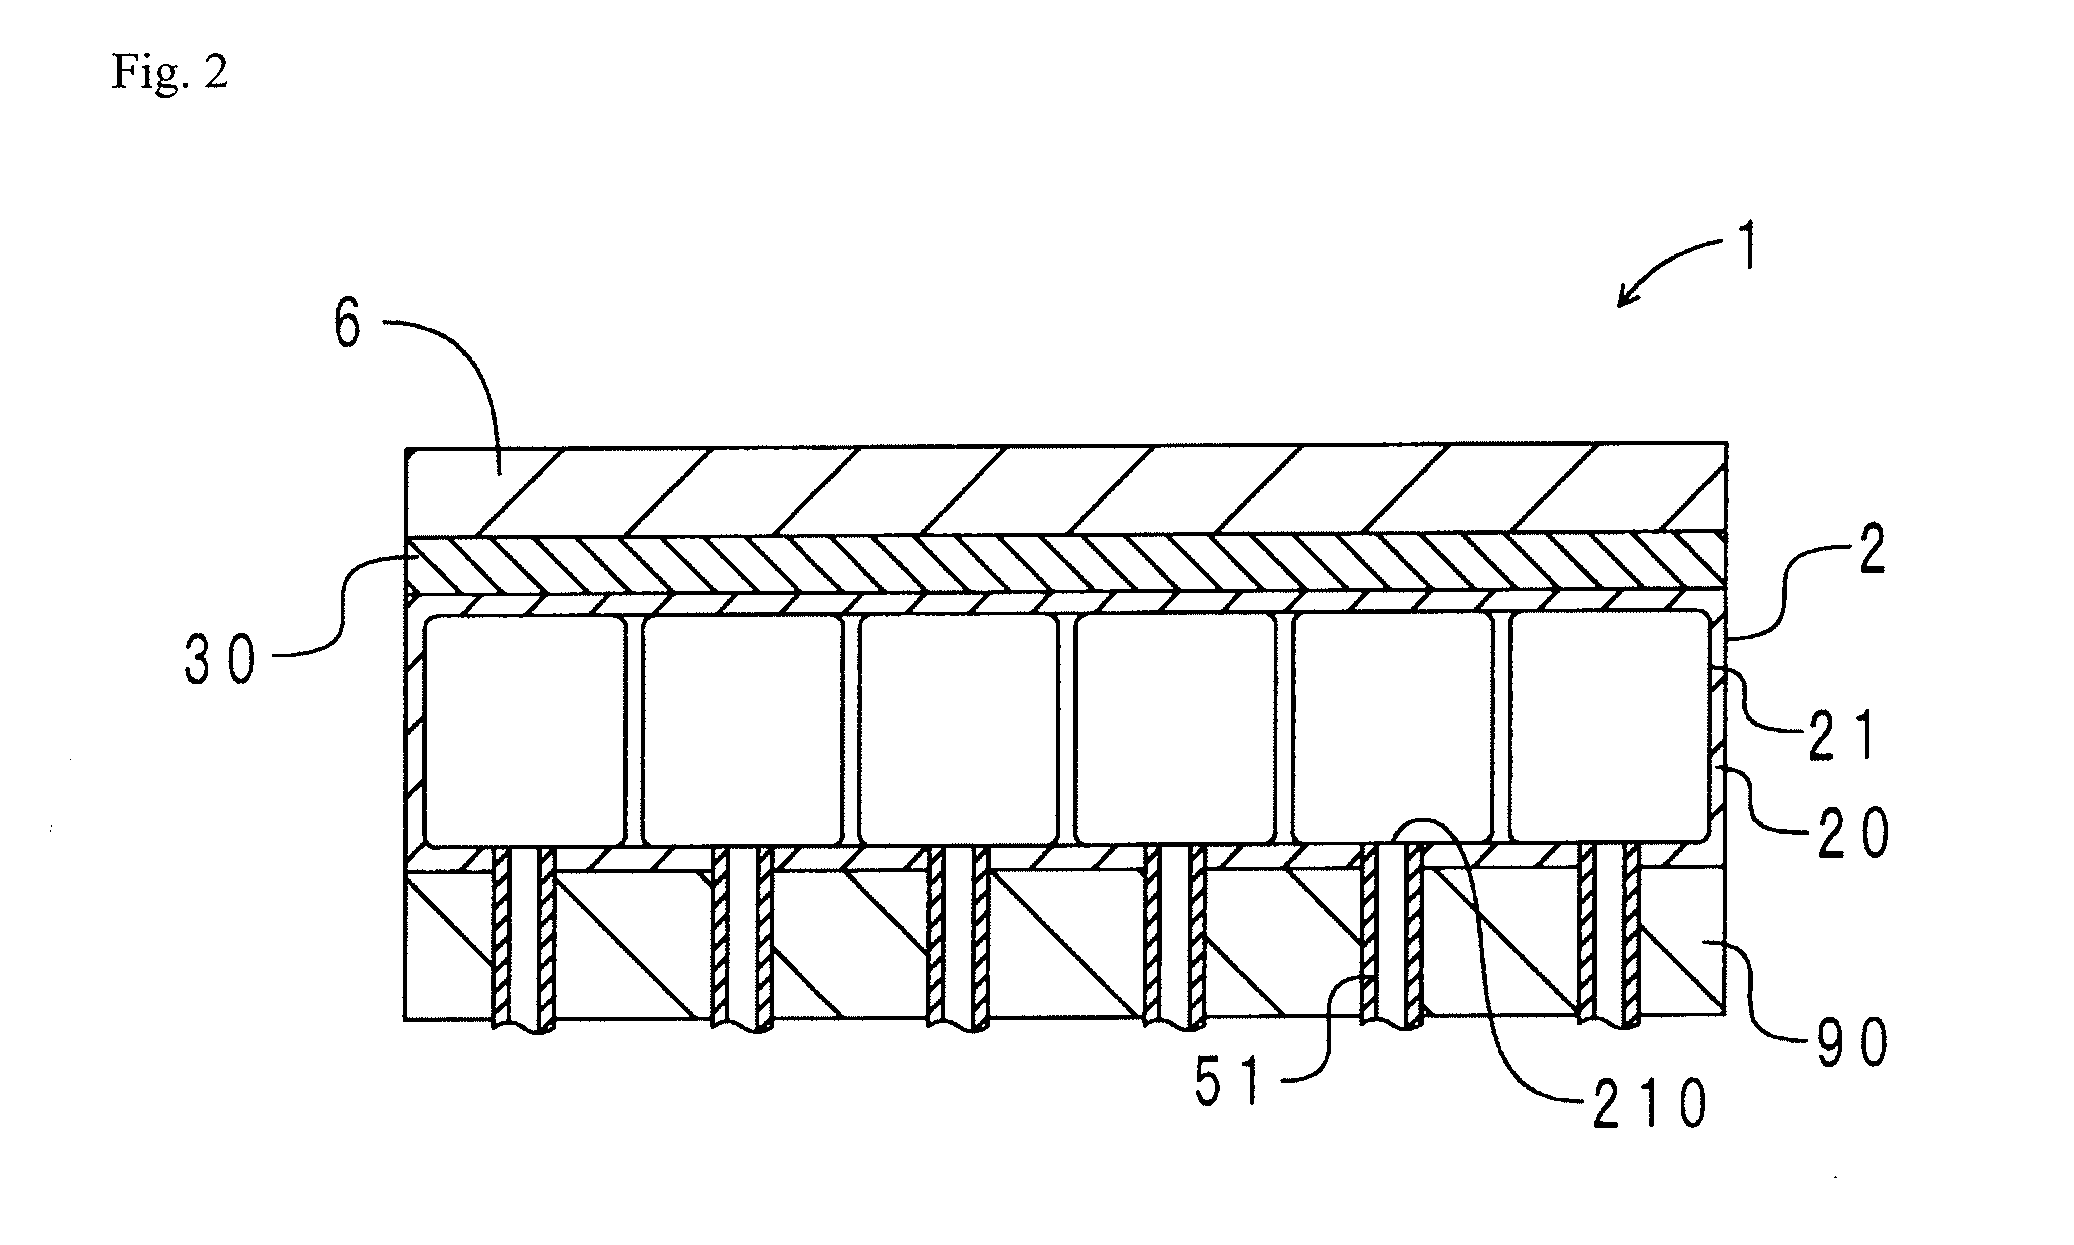 Body position and pressure control apparatus